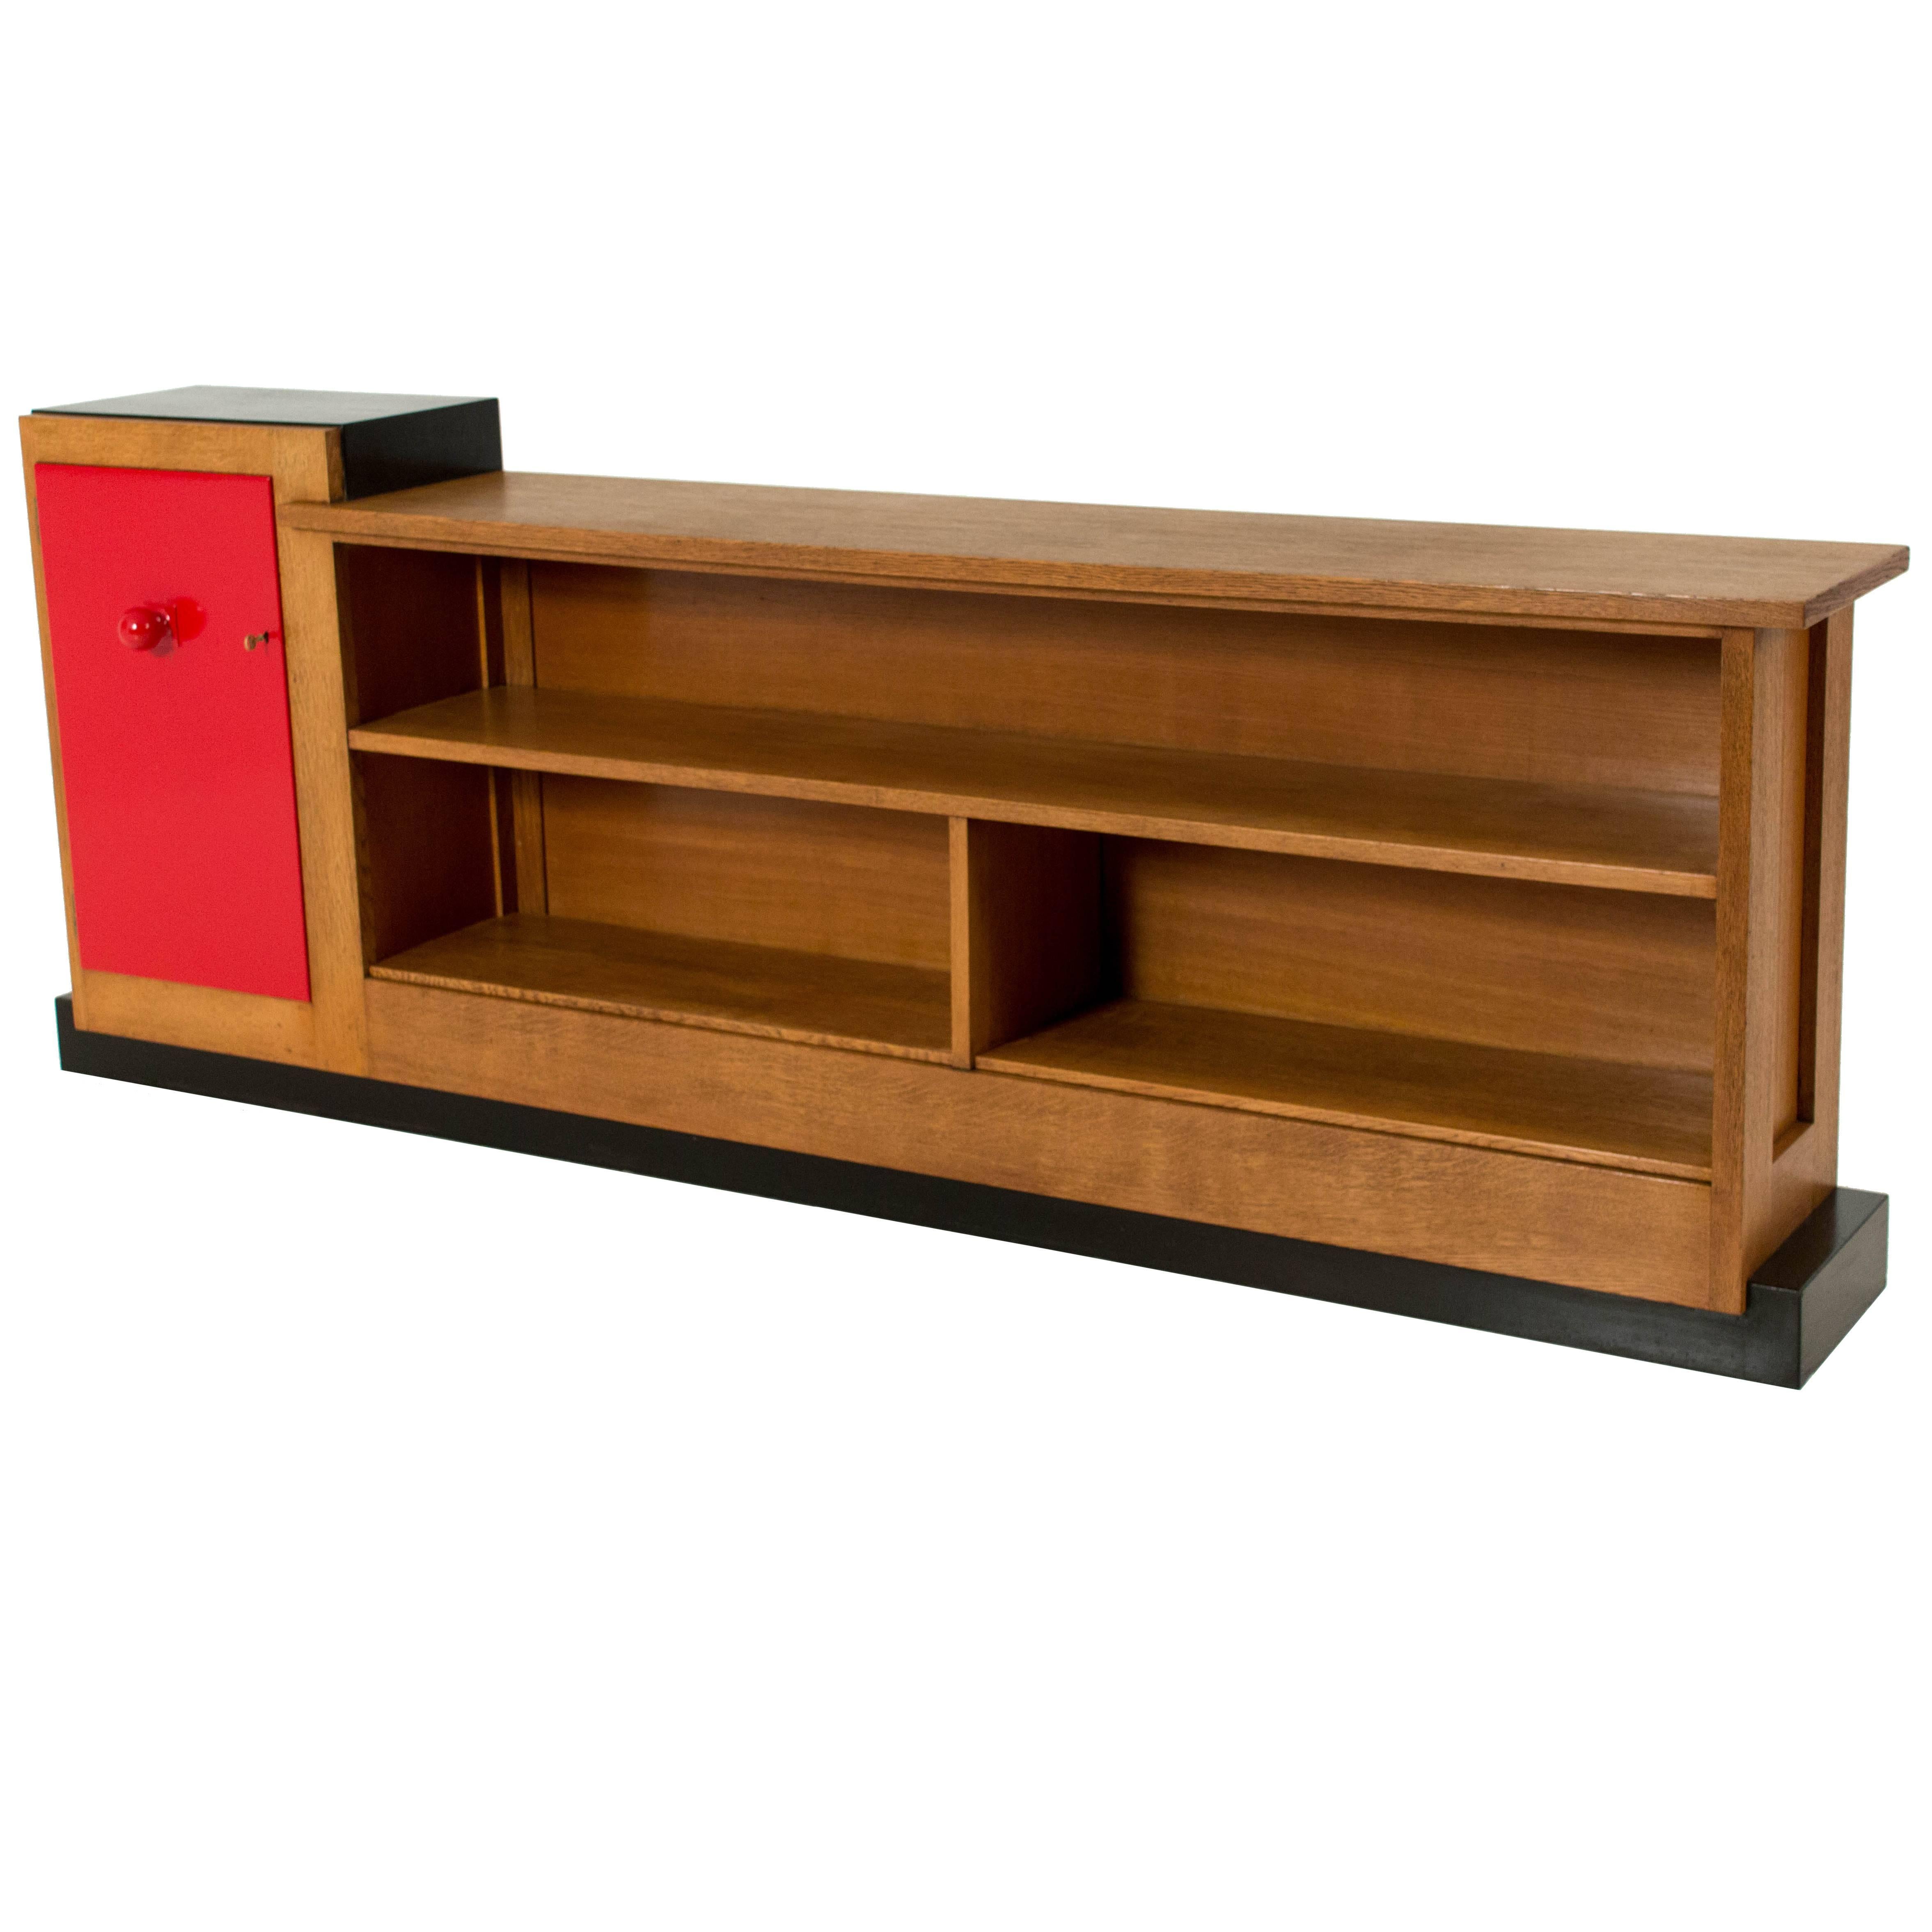 Important and Rare Art Deco Haagse School Sideboard by Henk Wouda for Pander